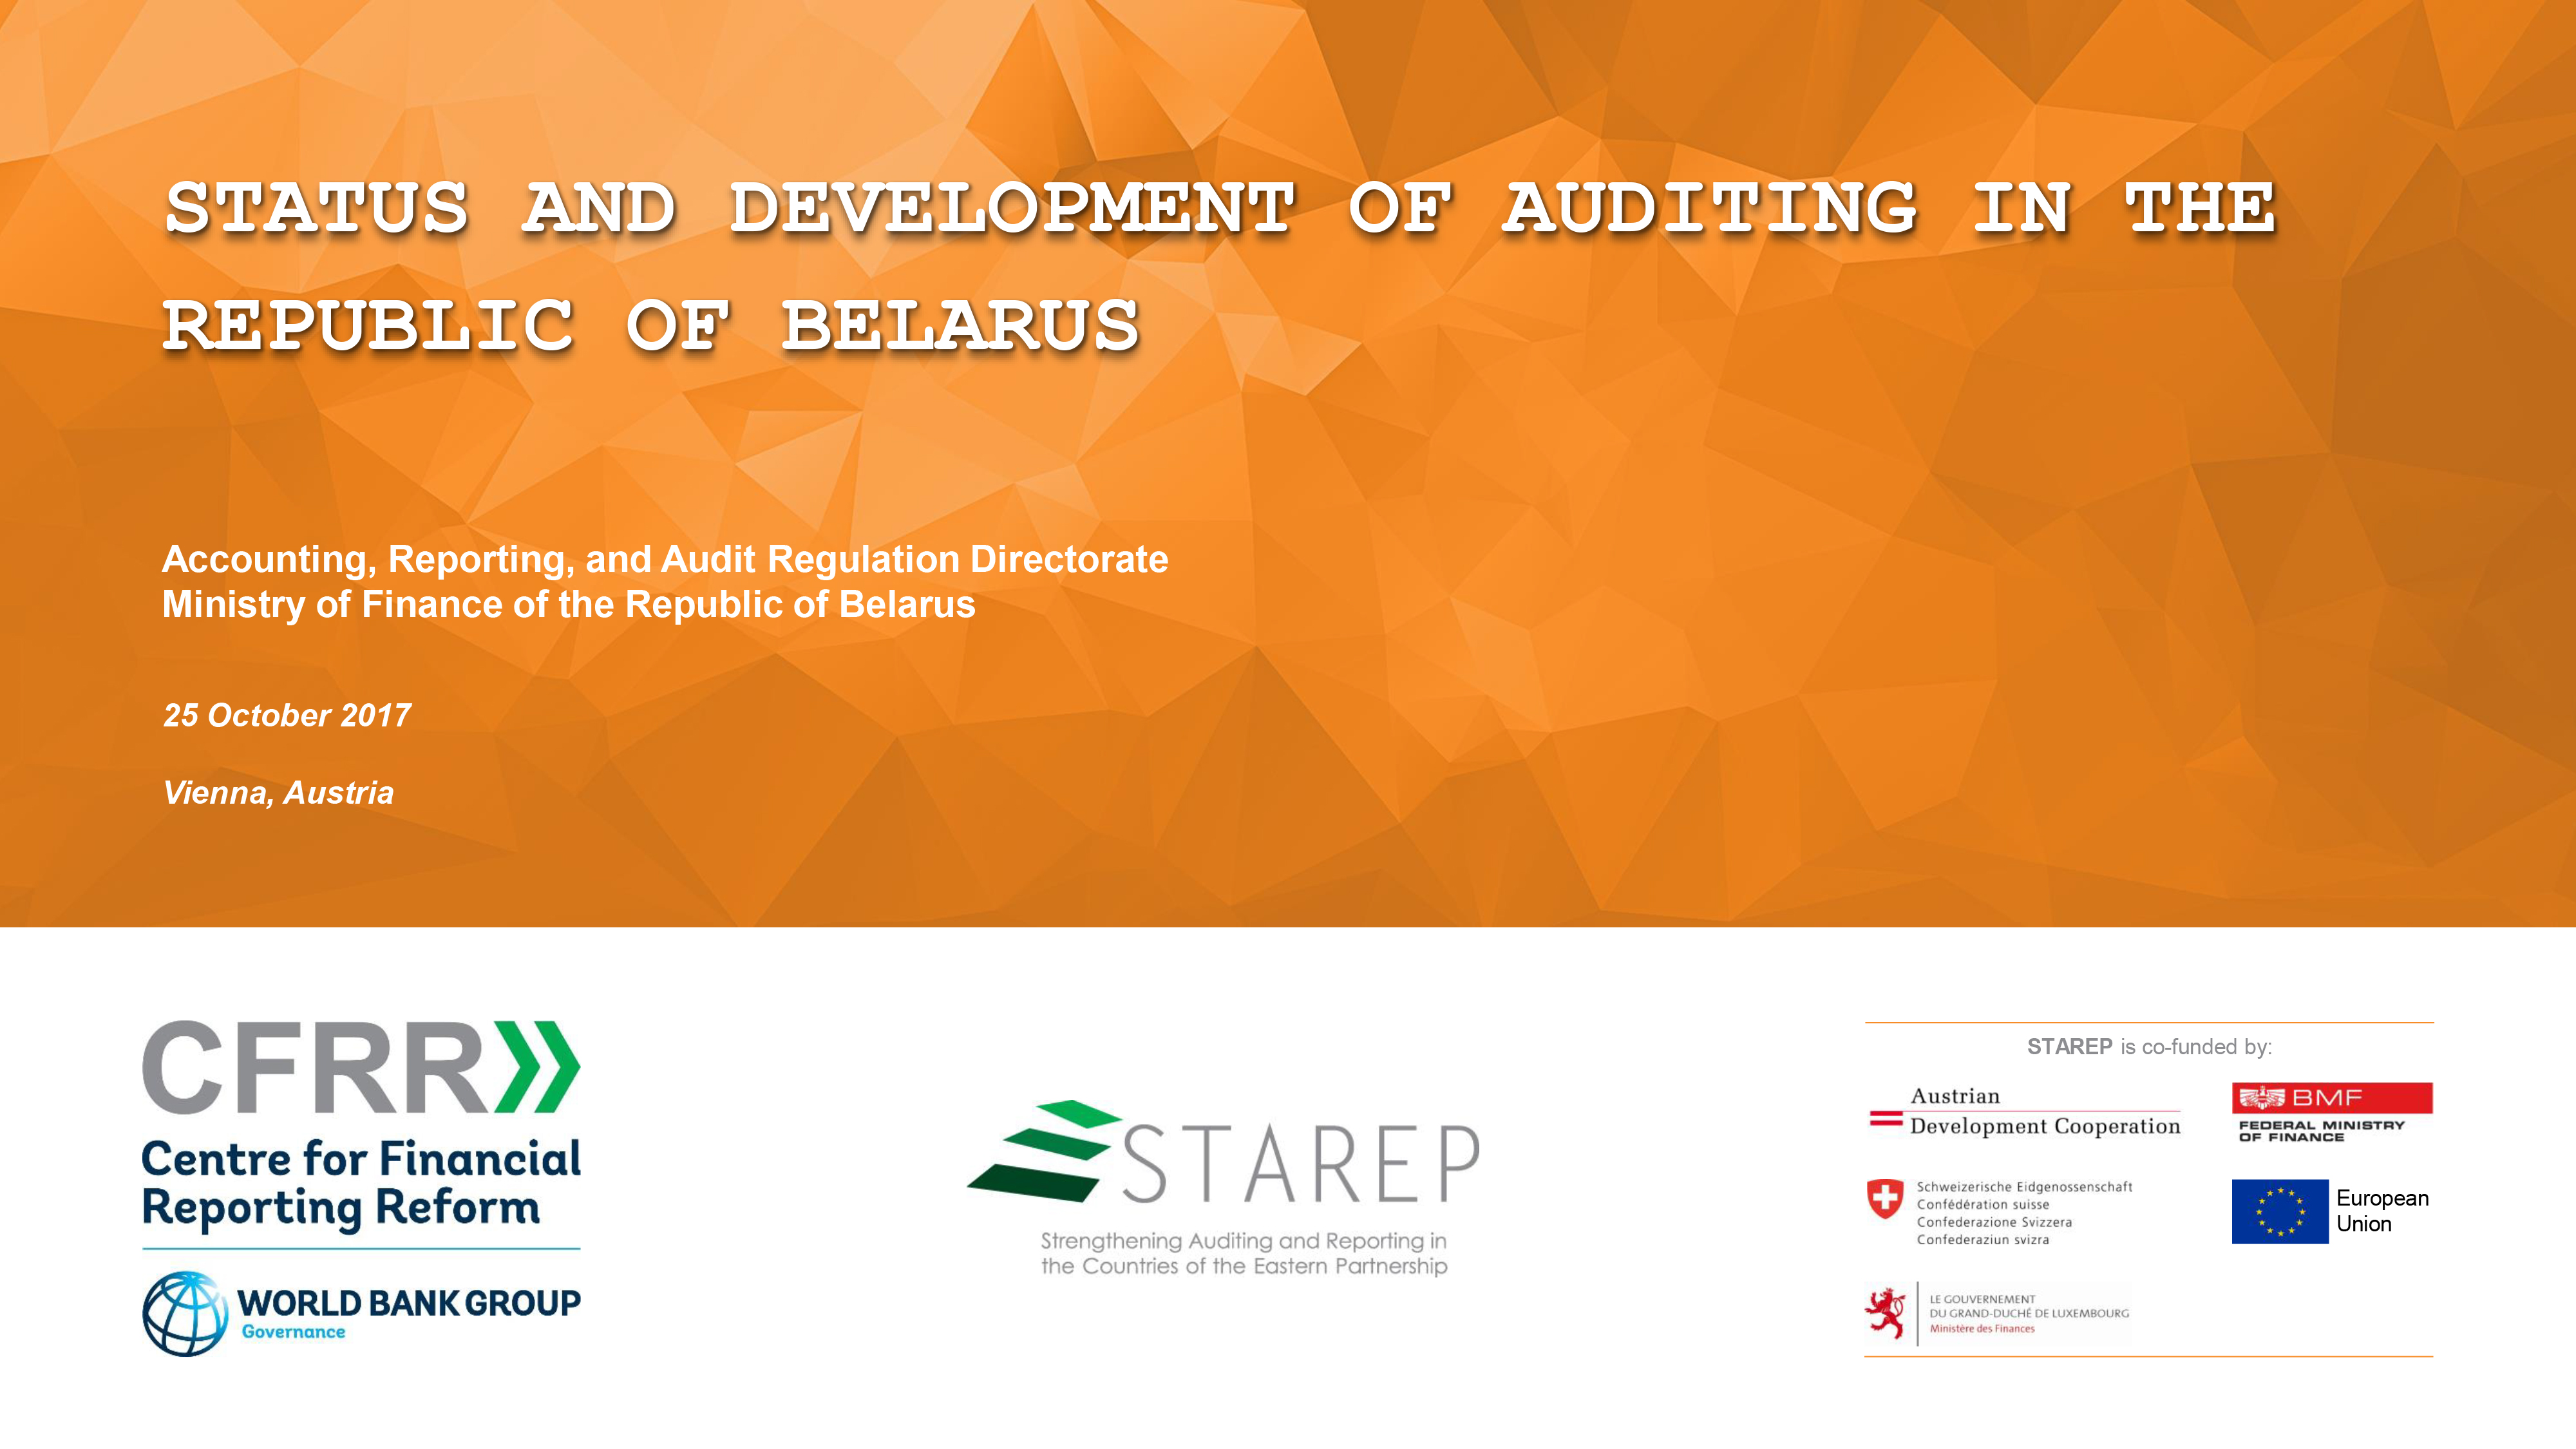 Status and Development of Auditing in the Republic of Belarus